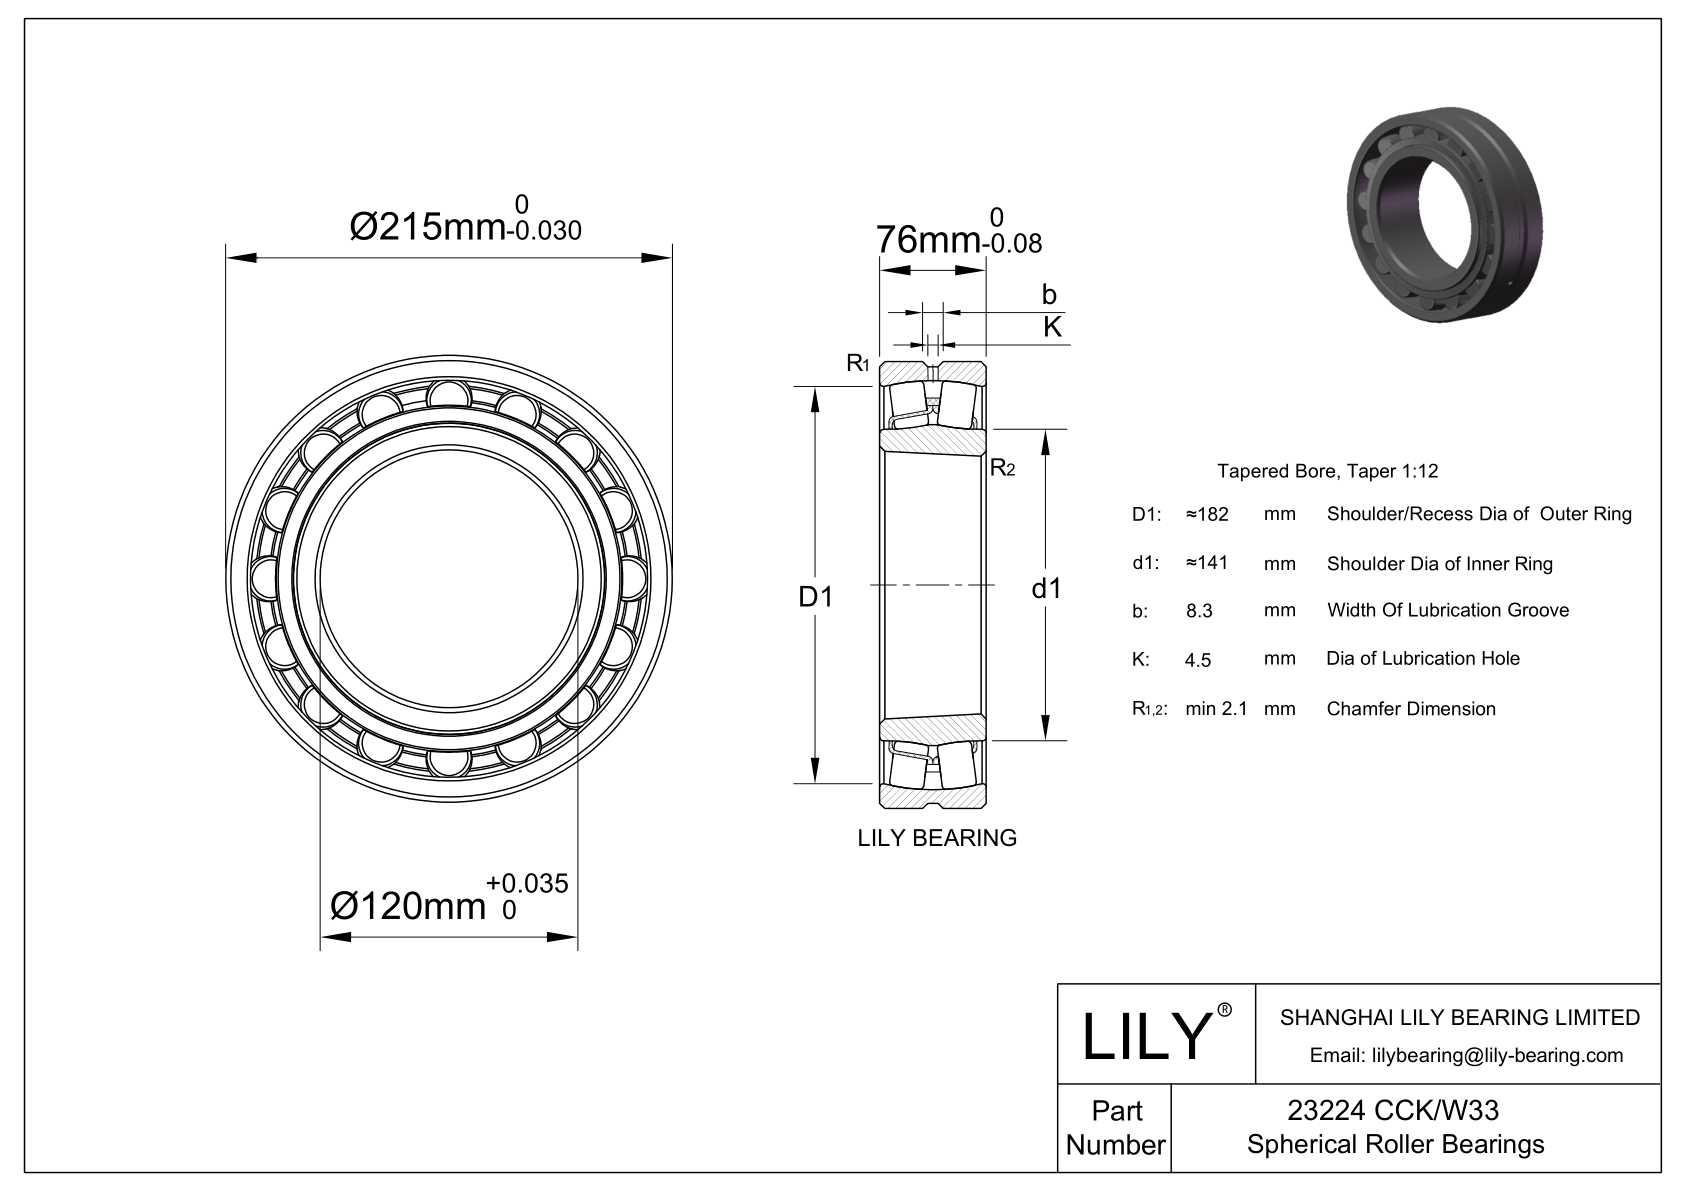 23224 CCK/W33 Double Row Spherical Roller Bearing cad drawing